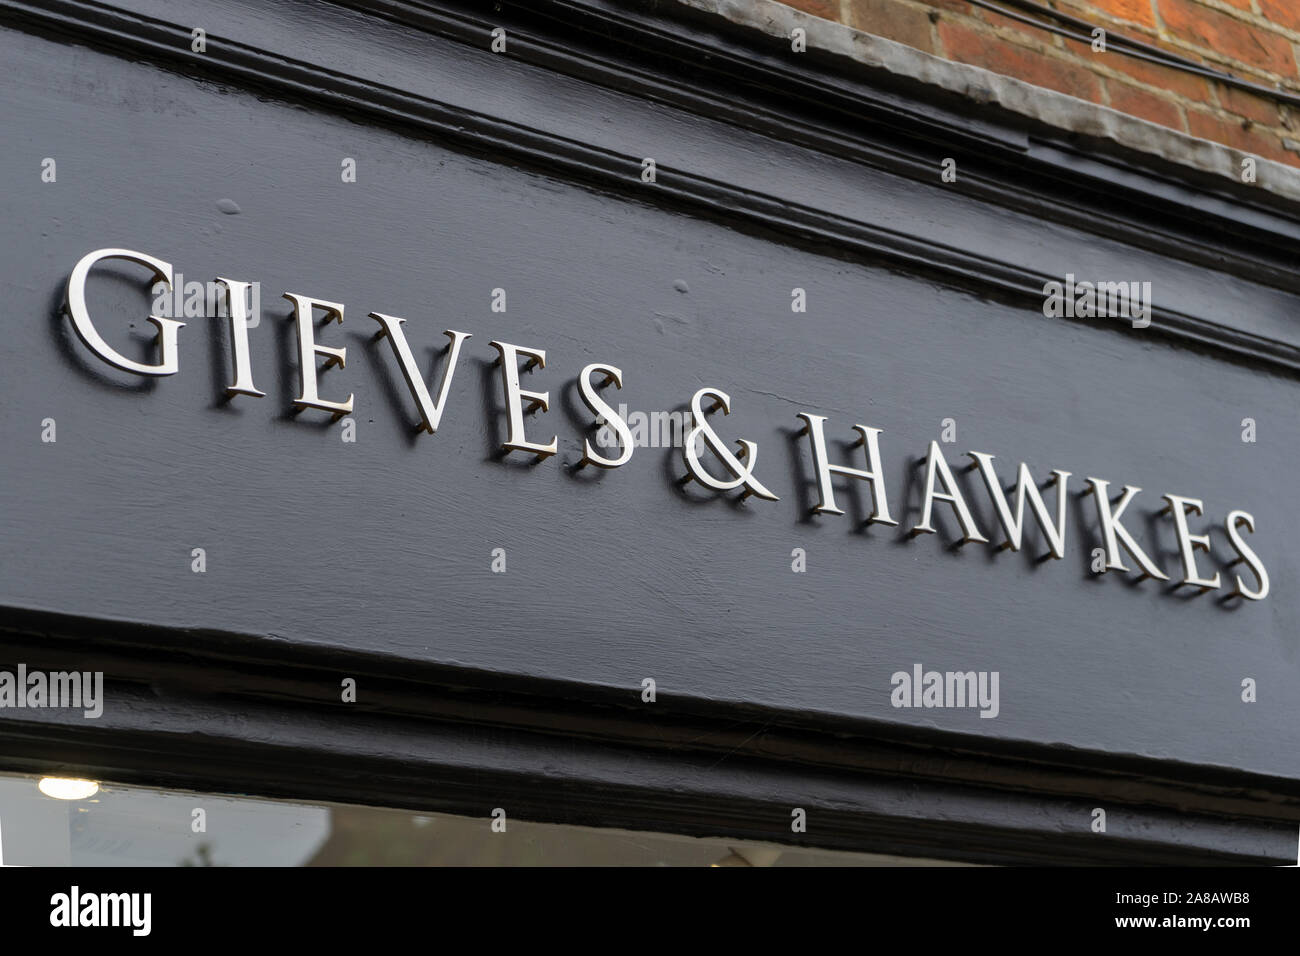 the sign above Gieves and Hawkes tailors Stock Photo